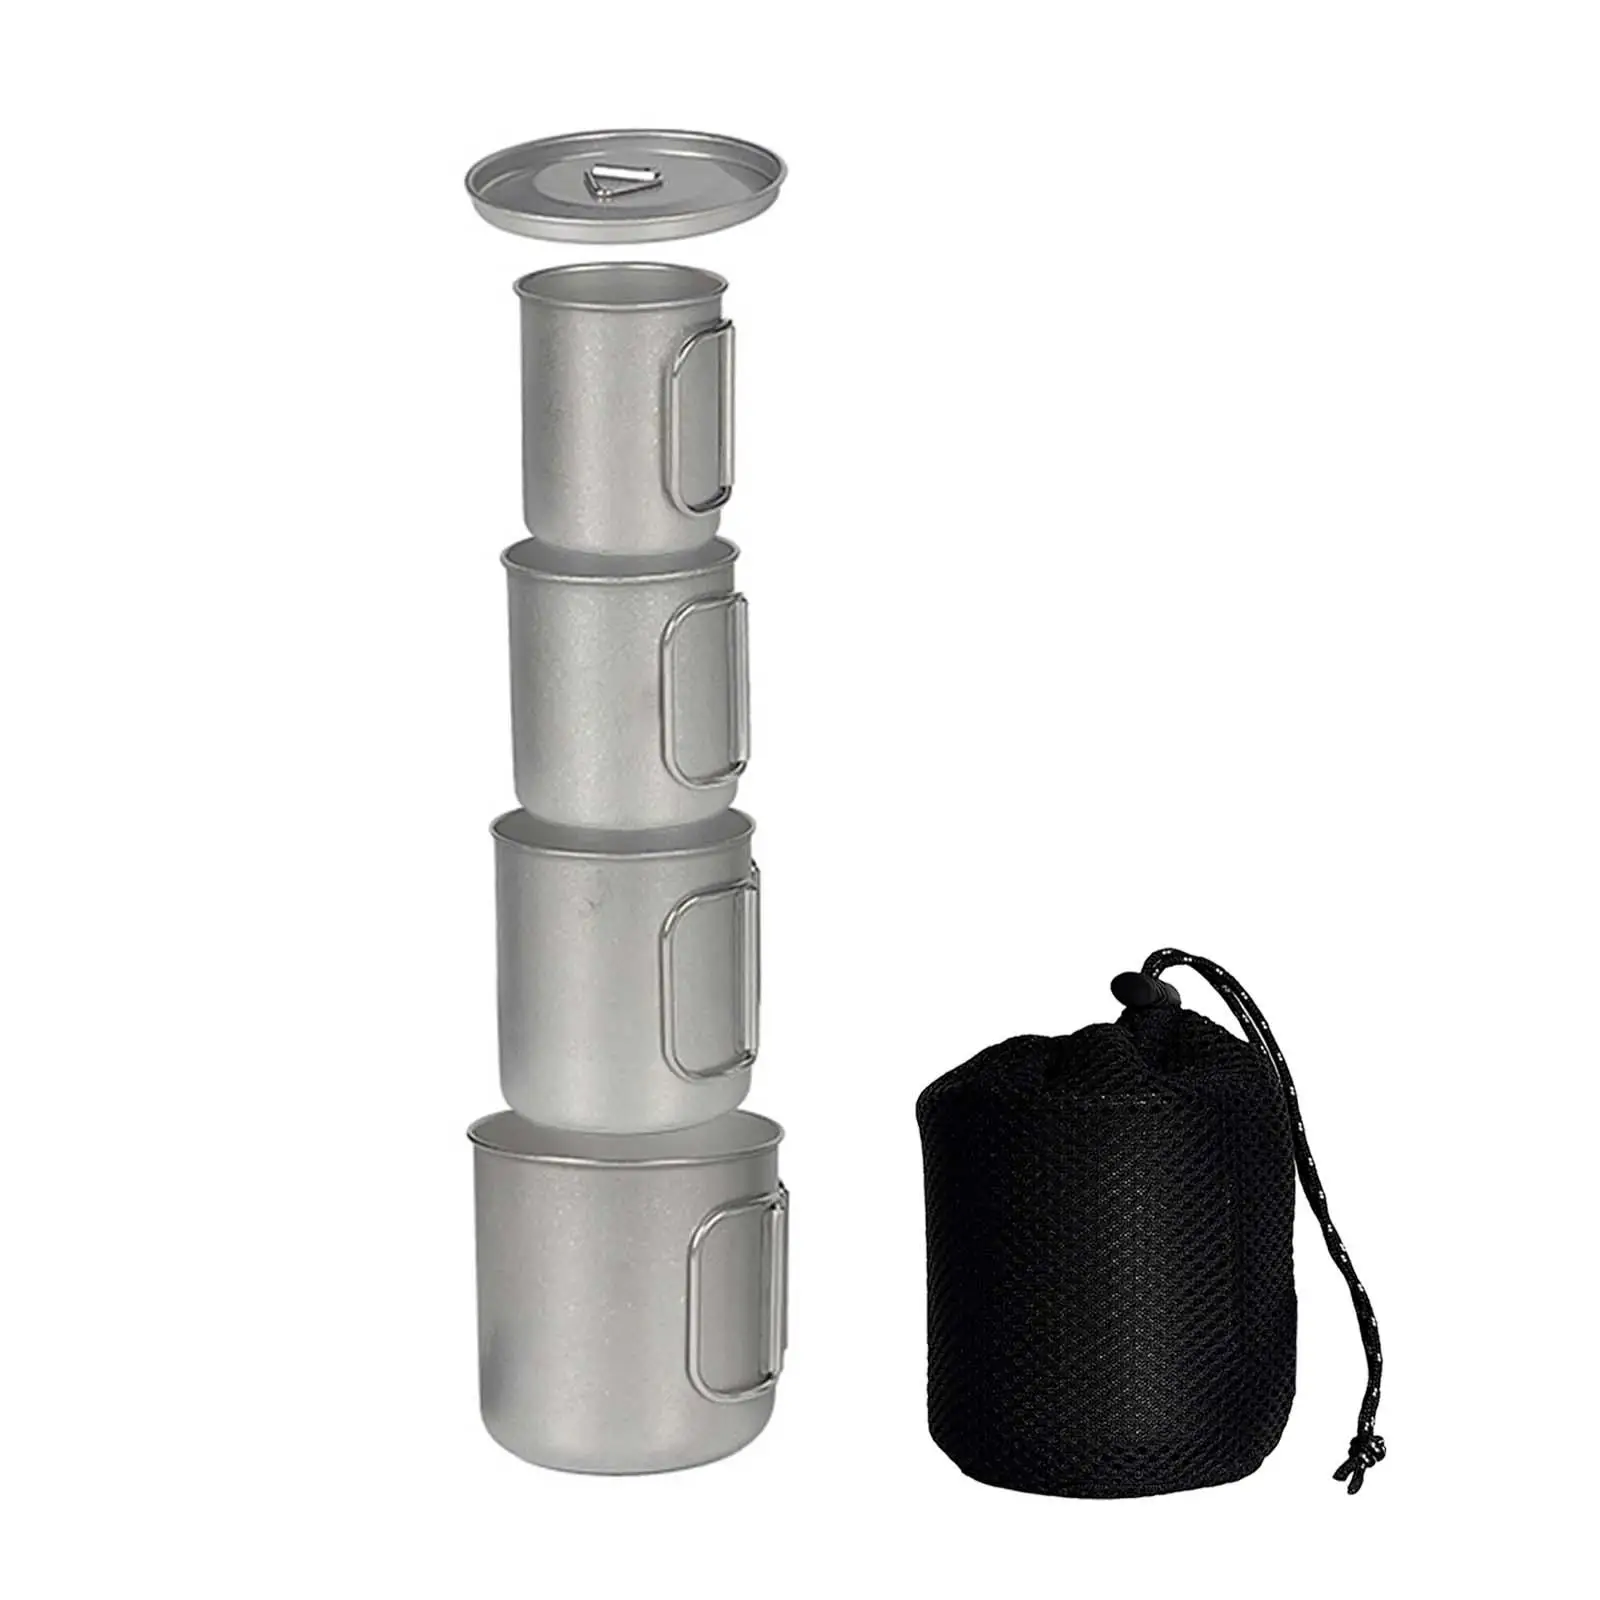 4x Water Cup Mug Teakettle Water Bottle 25oz Tea Coffee Mugs with Lid Camping Cup Pot Stackable Cups for Mountaineering Barbecue